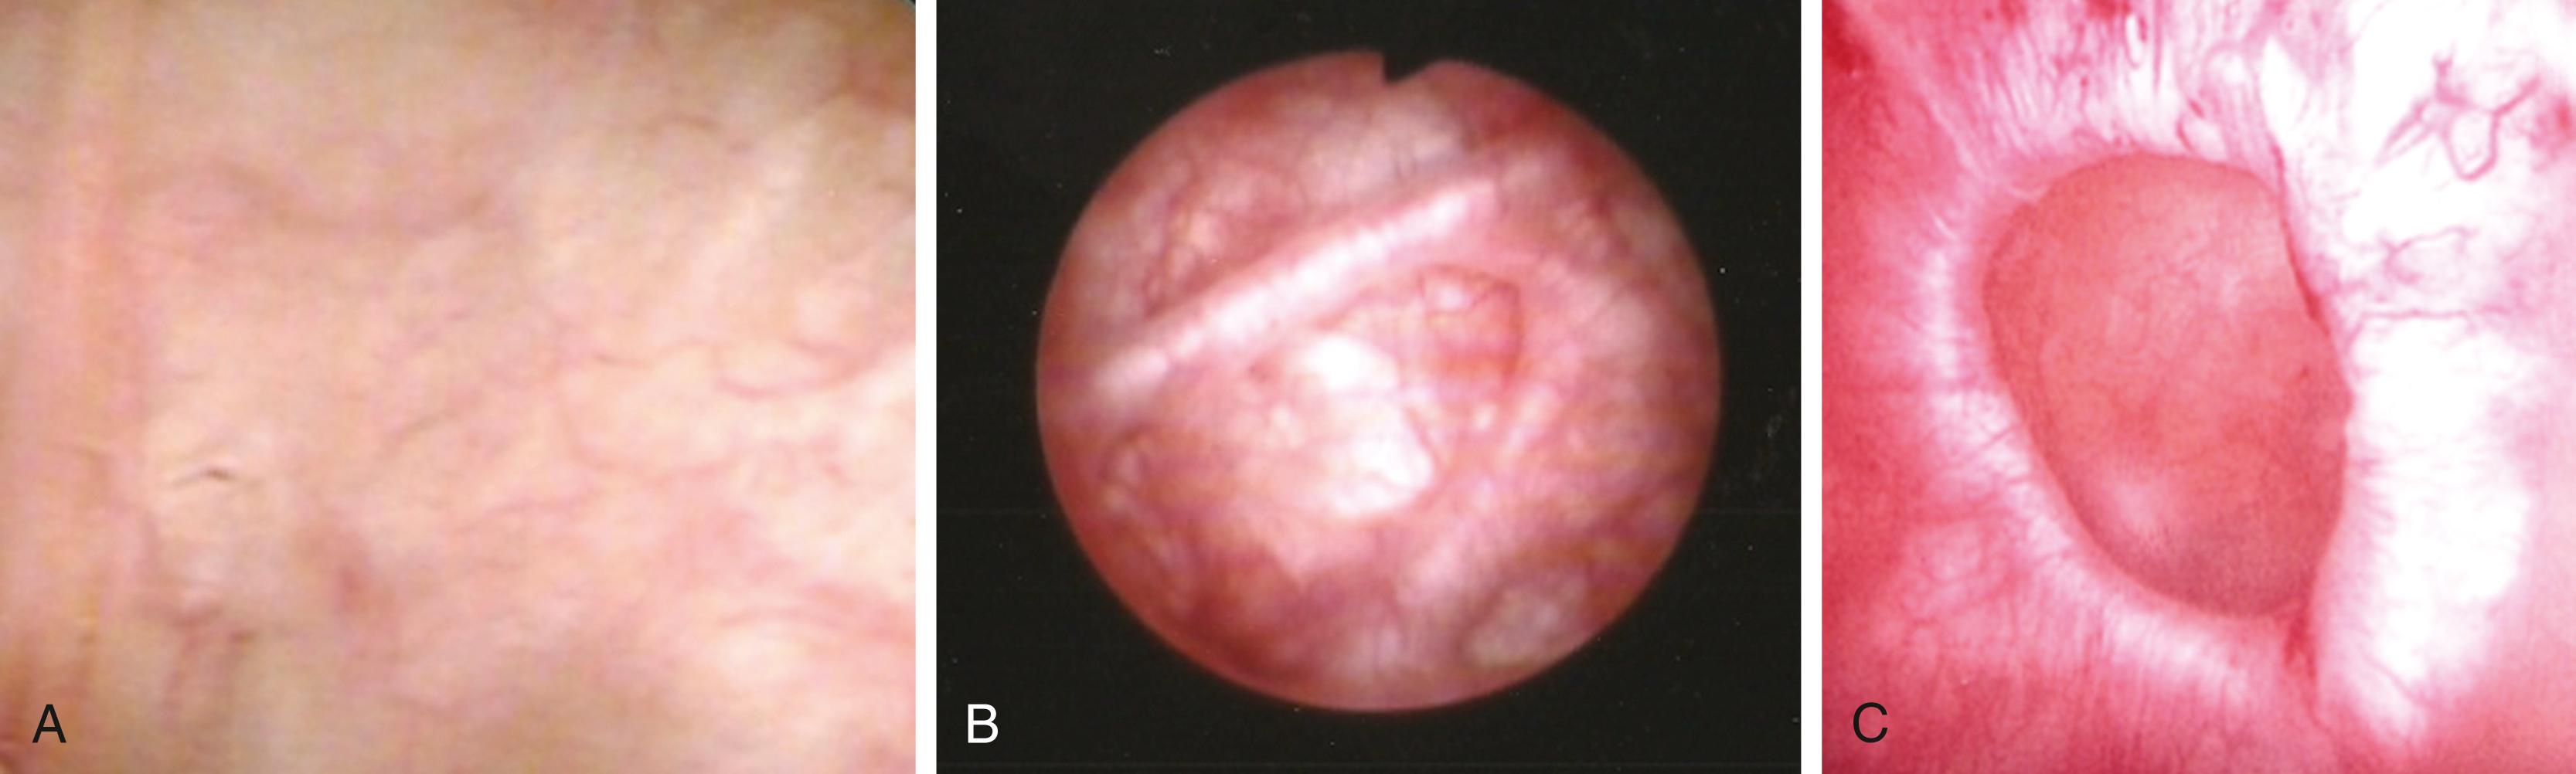 Figure 17.8, Images from cystoscopy of the bladder mucosa.